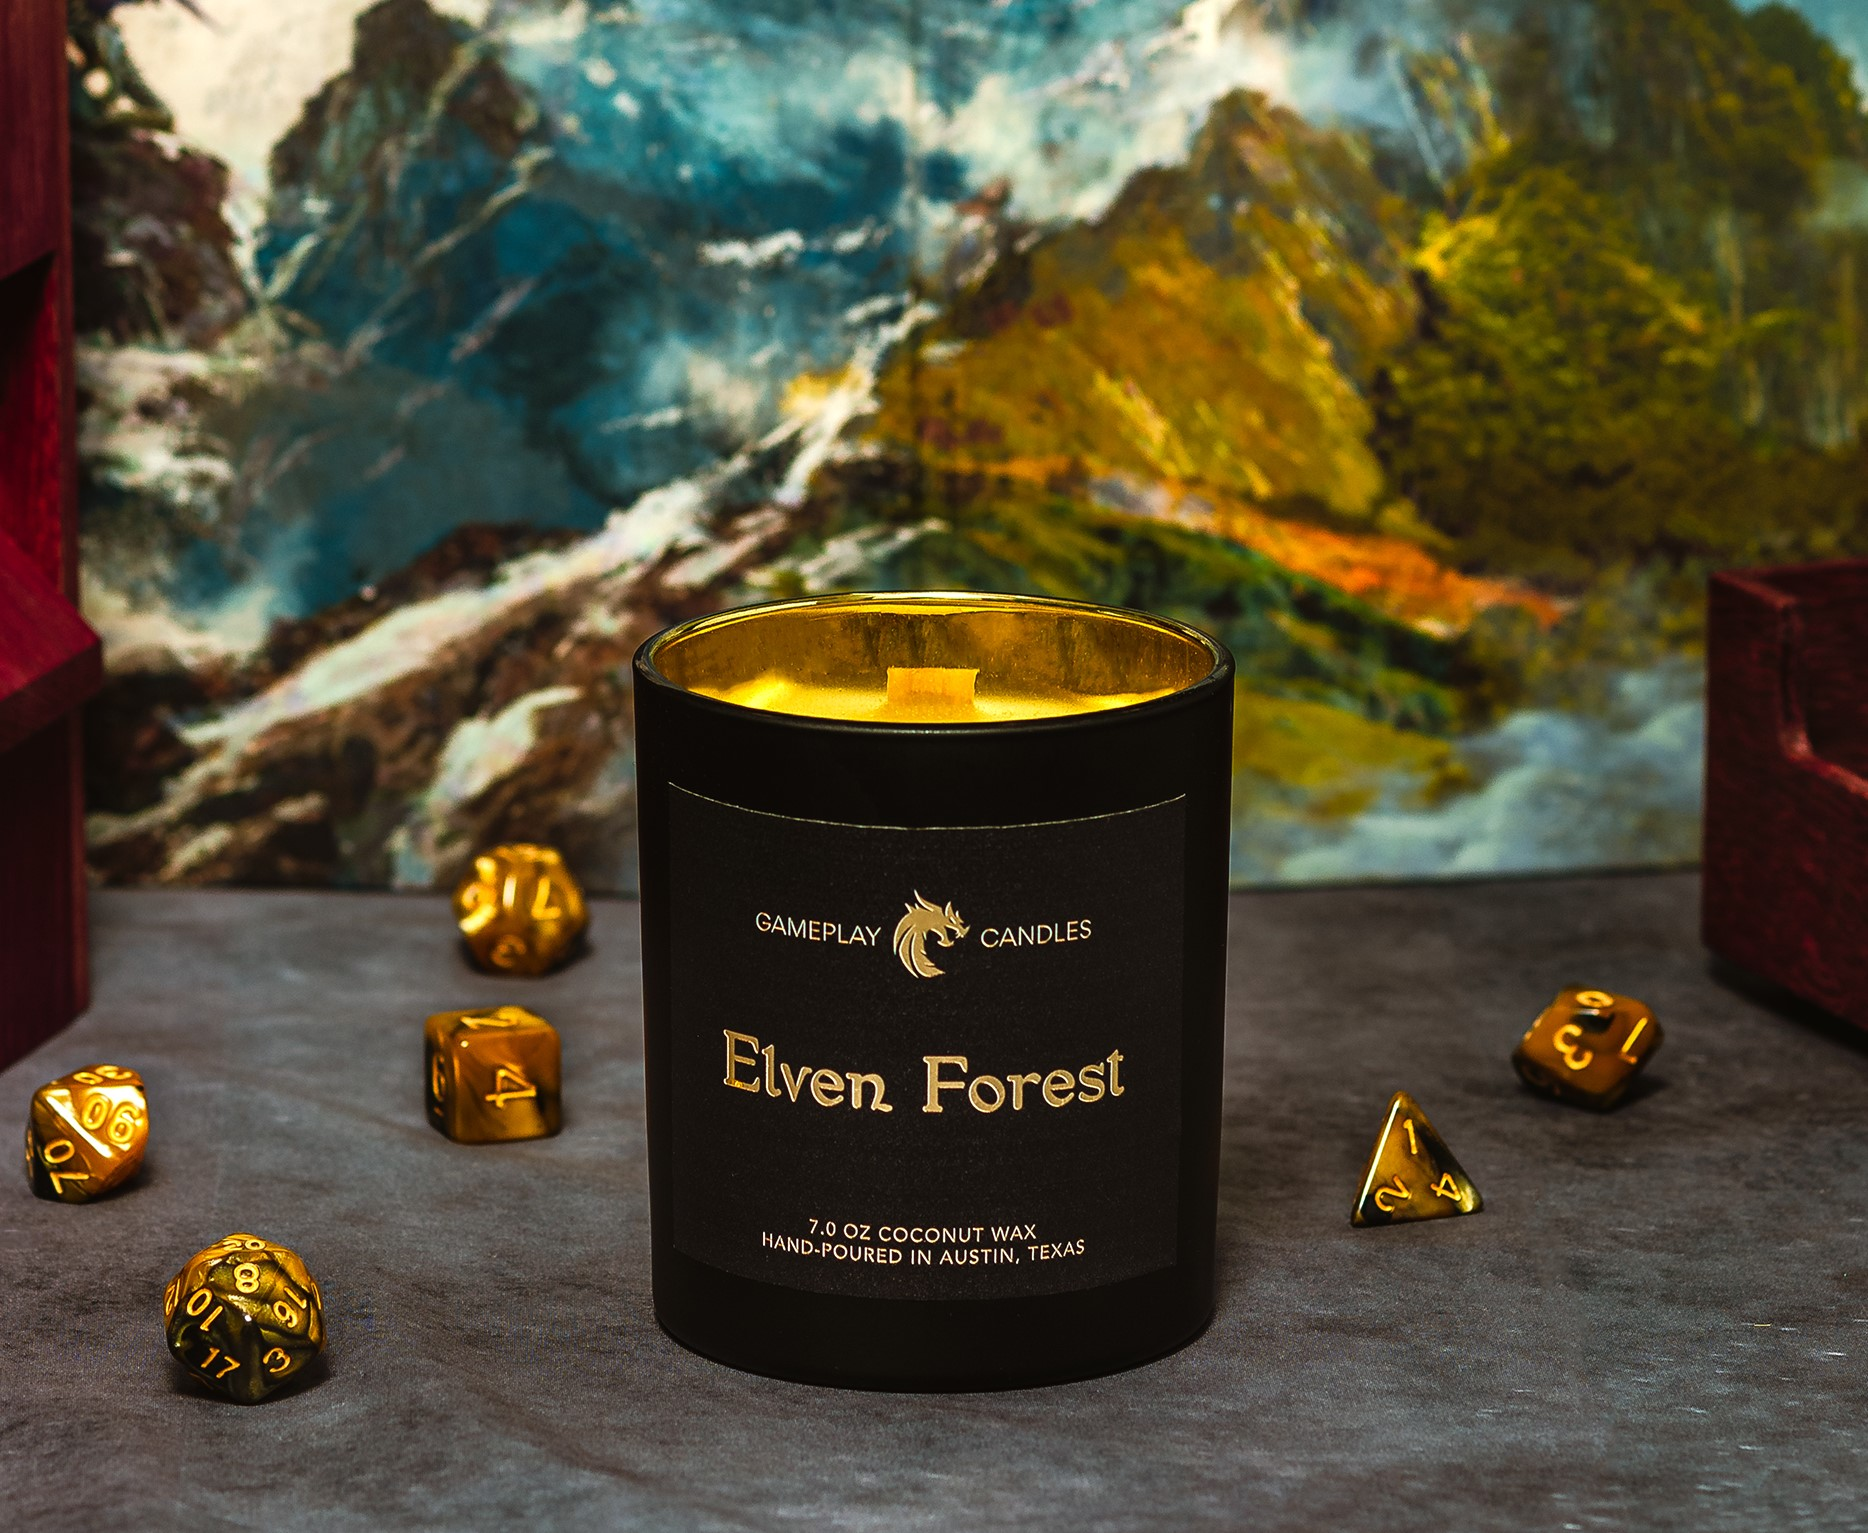 Our Elven Forest Jar candle has a burn time of 30+ hours and will last through several dungeons!